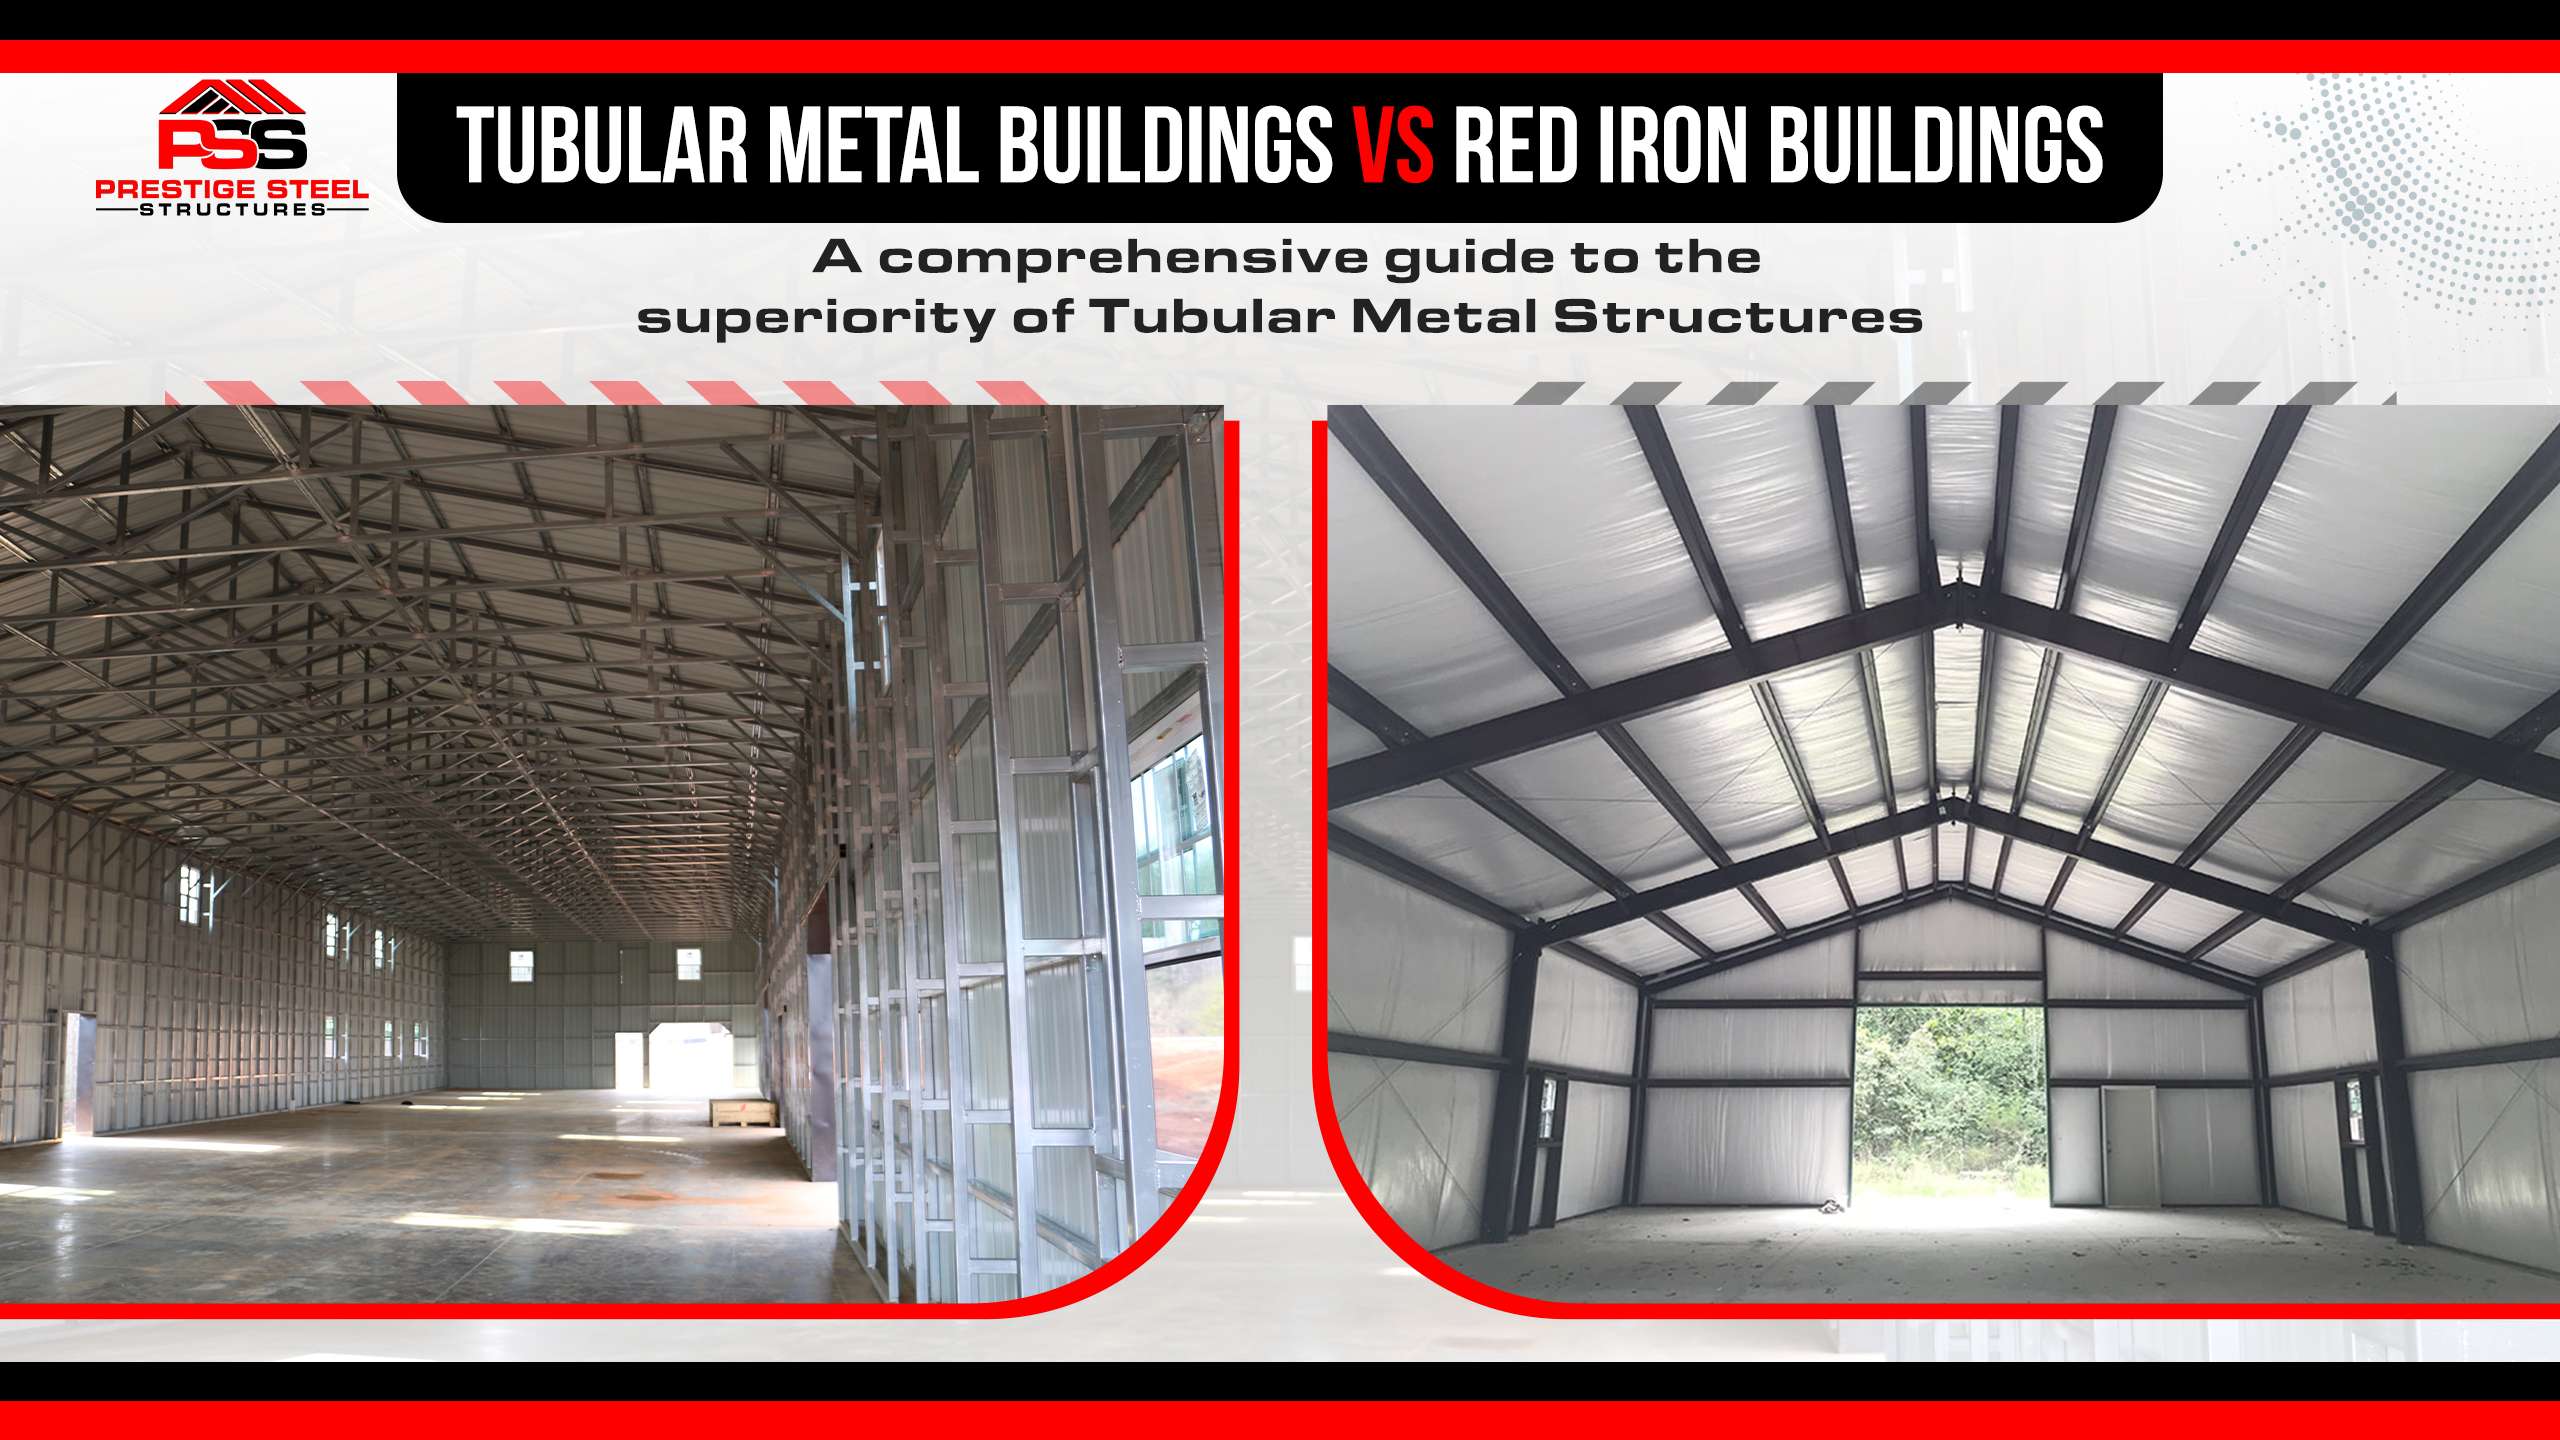 Tubular Metal Buildings vs. Red Iron Buildings: A Comprehensive Guide to the Superiority of Tubular Metal Structures